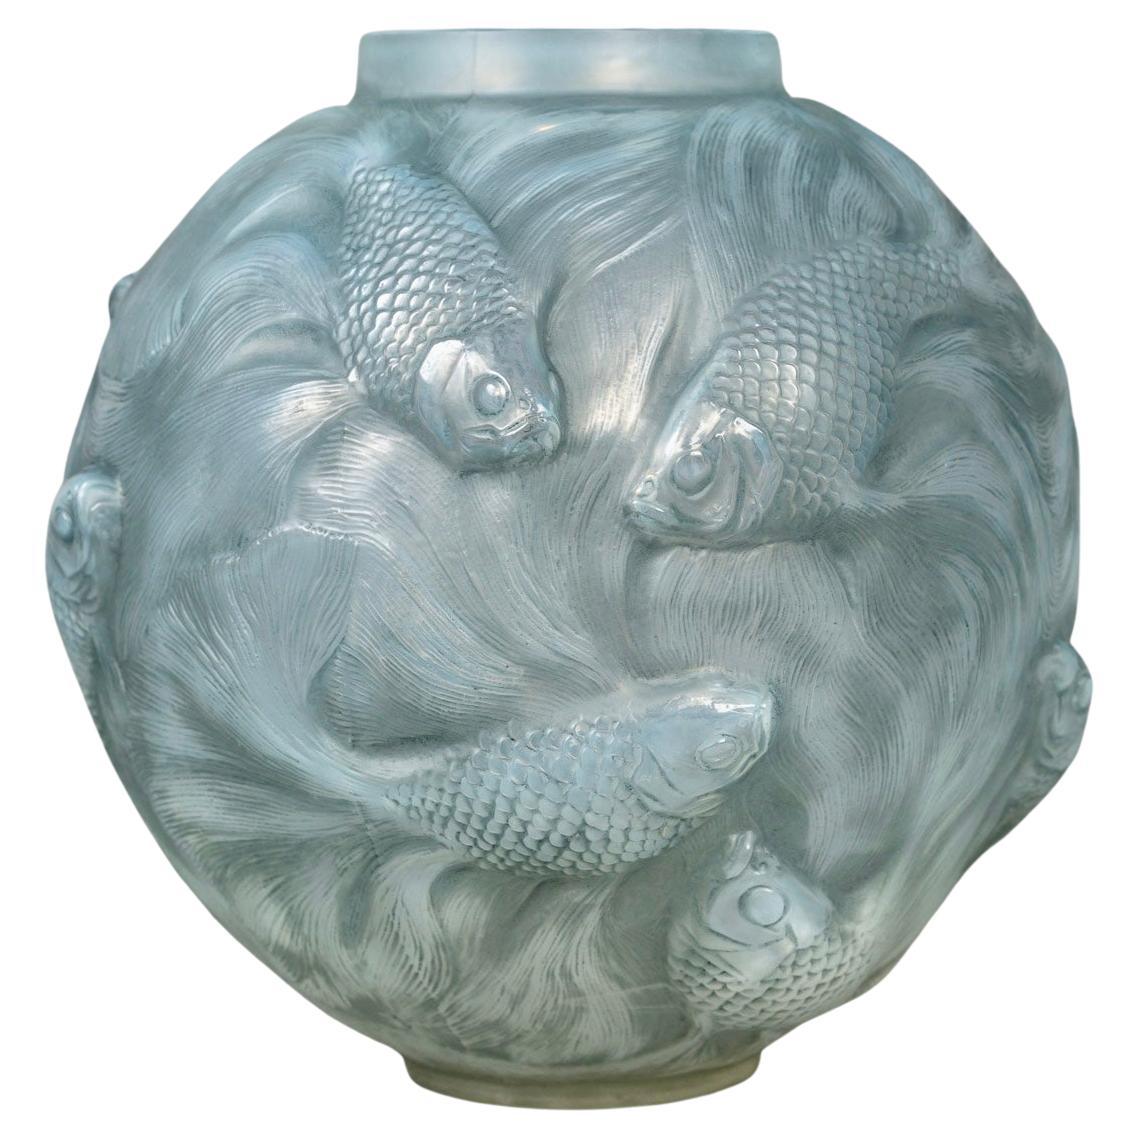 1924 Rene Lalique Vase Formose Cased Opalescent Glass with Blue Patina For Sale